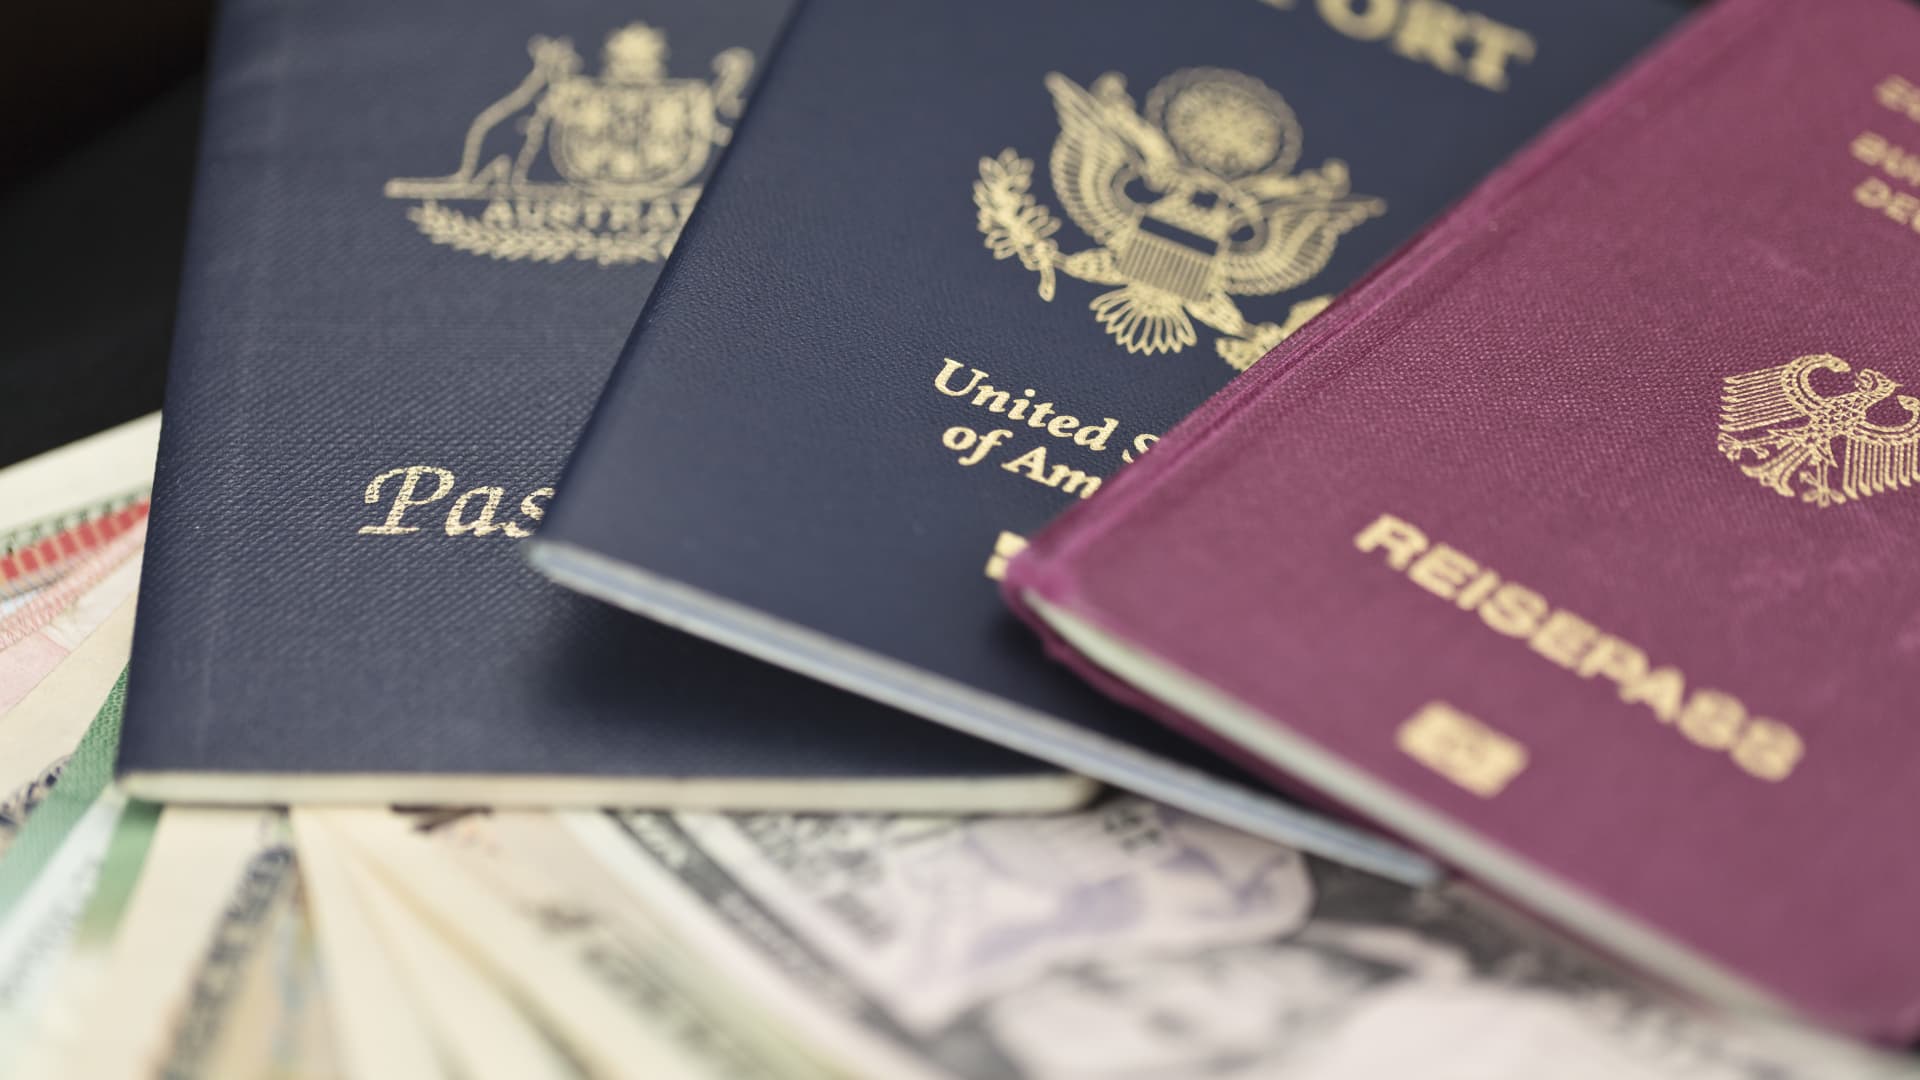 Rich Americans get second passports, citing risk of instability